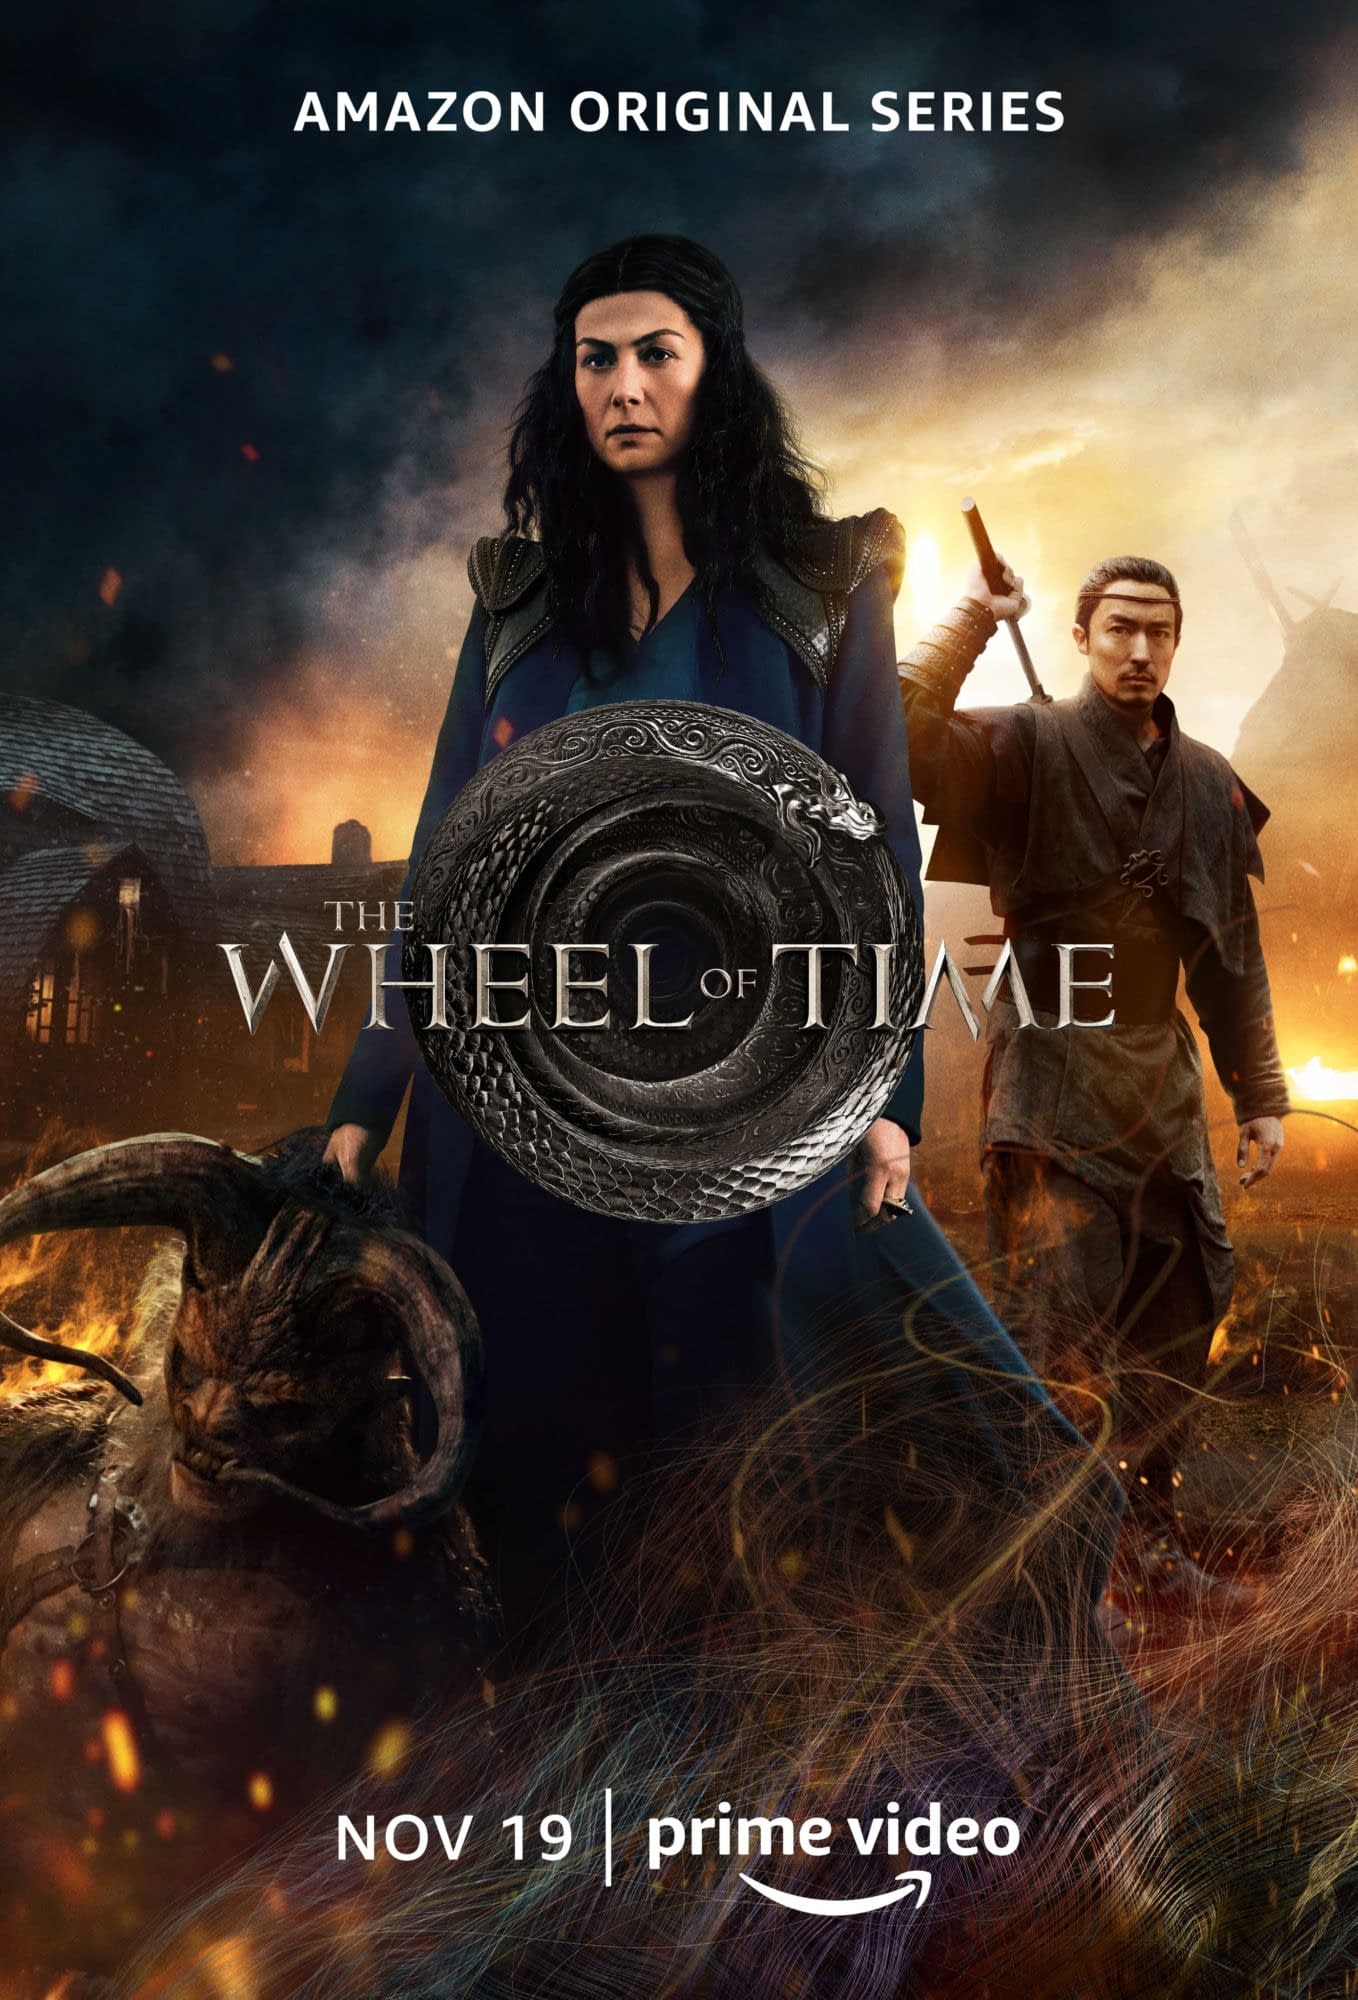 Can we expect the series “The Wheel of Time” to be on Amazon Prime